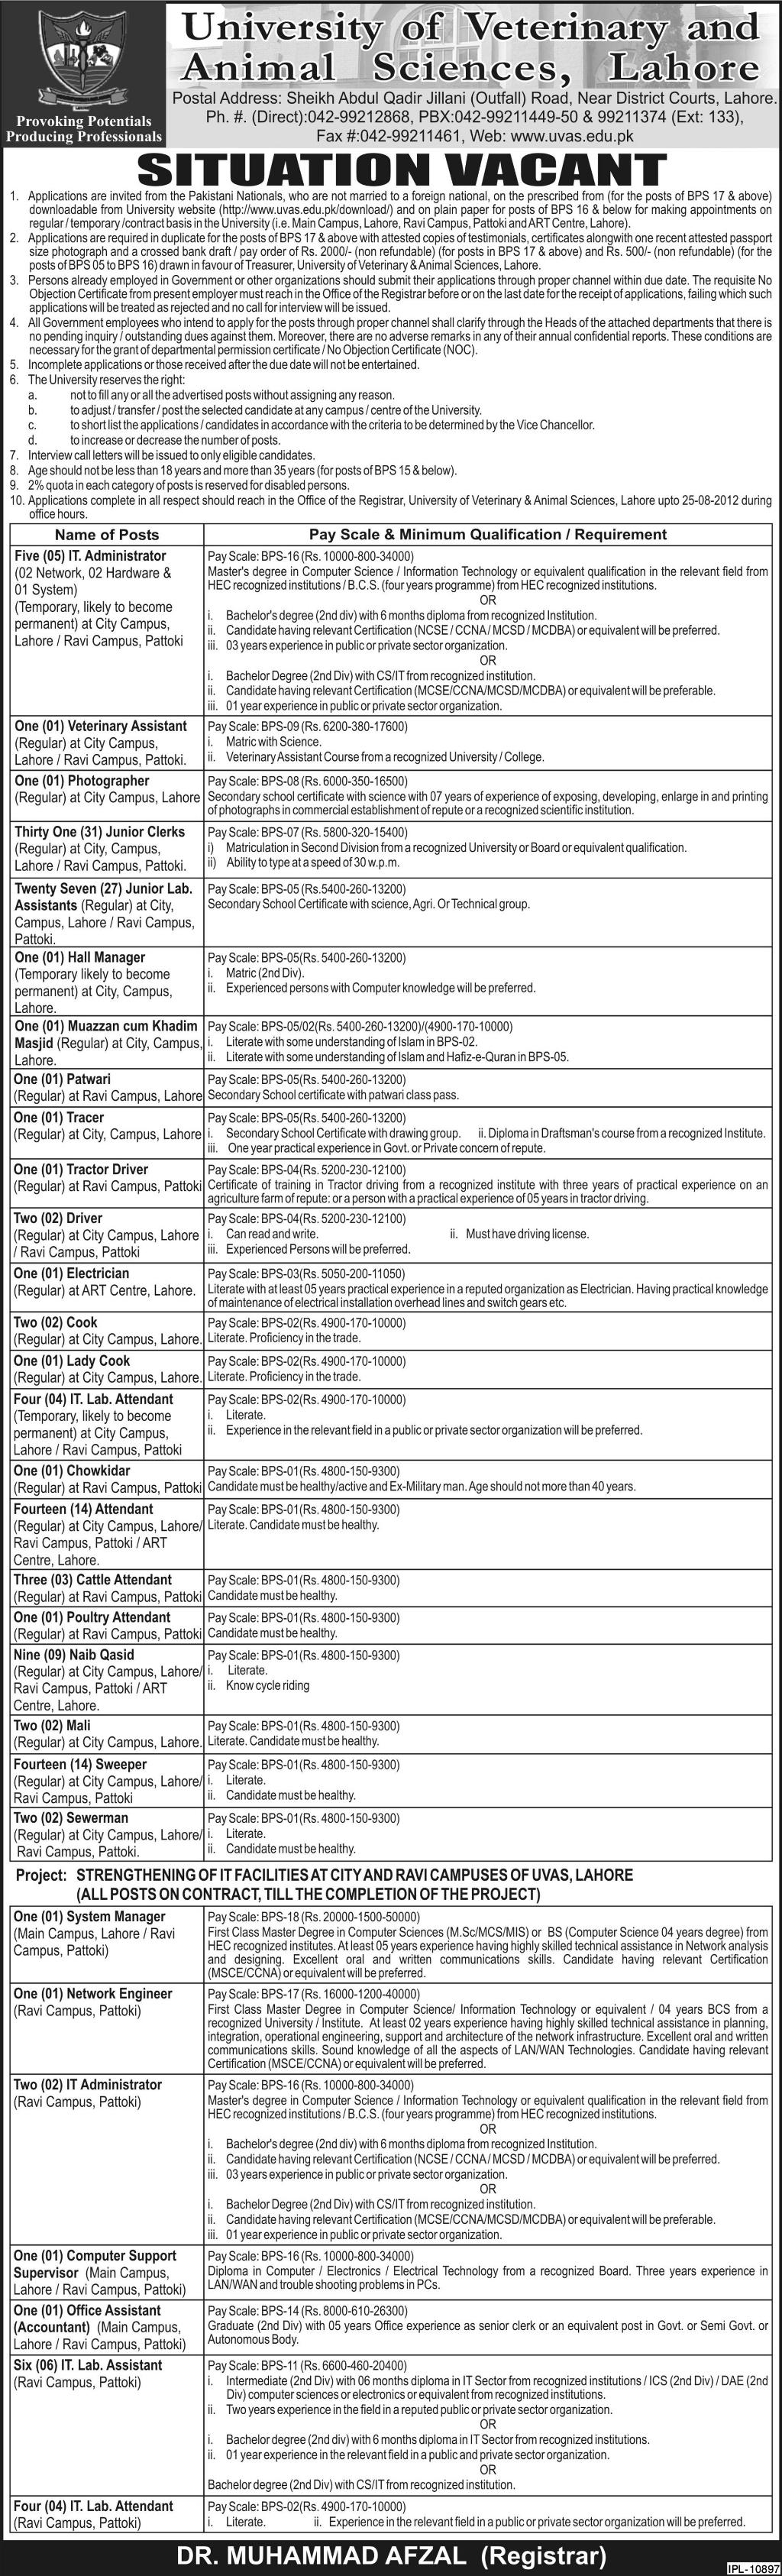 Non-Teaching Staff Required at University of Veterinary and Animal Sciences Lahore (Government Job)